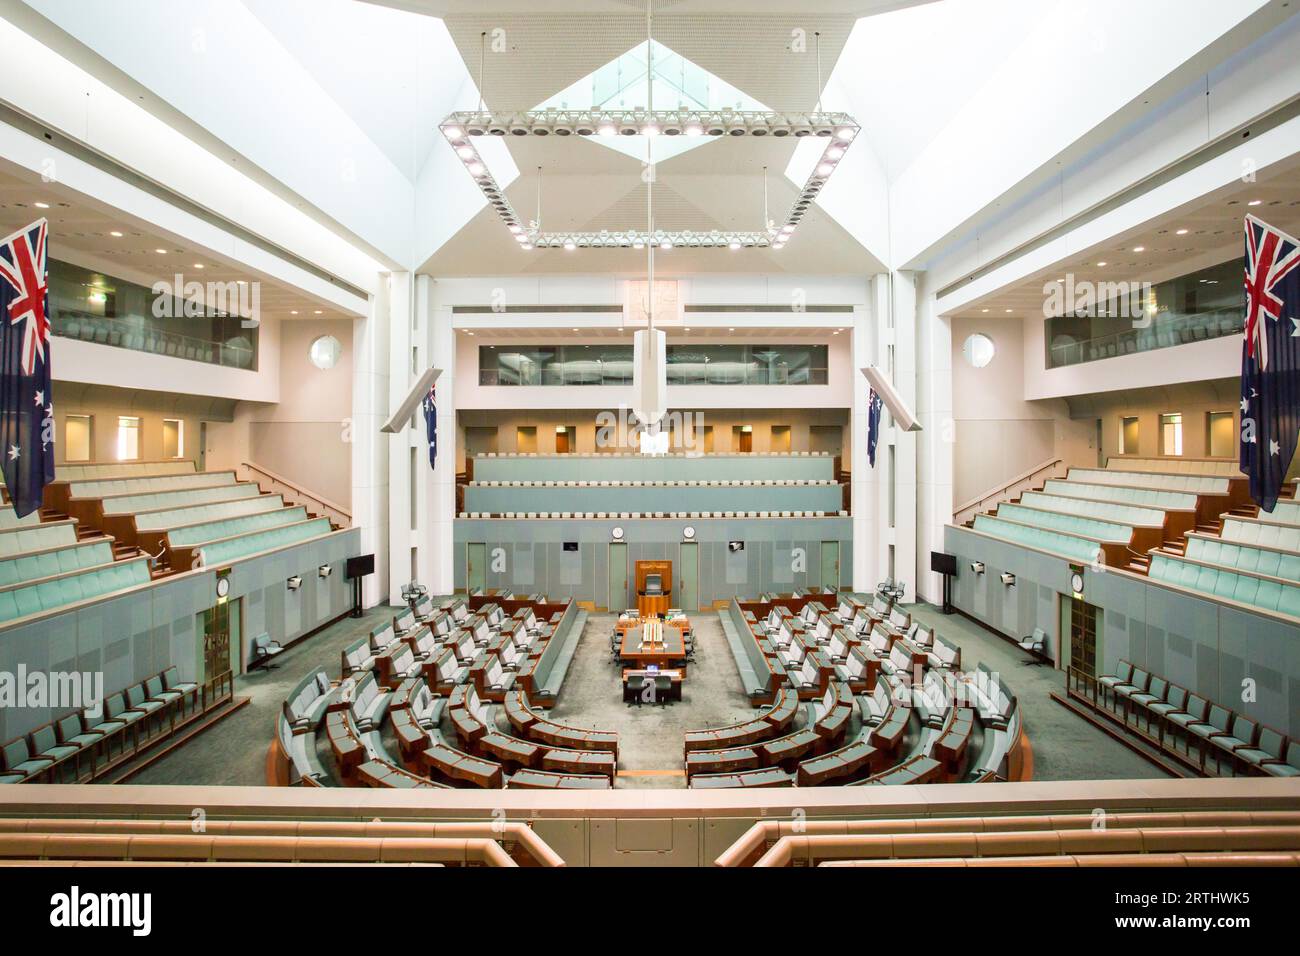 CANBERRA, AUSTRALIA, MAR 25, 2016: Interior view of the House of Representatives in Parliament House, Canberra, Australia Stock Photo